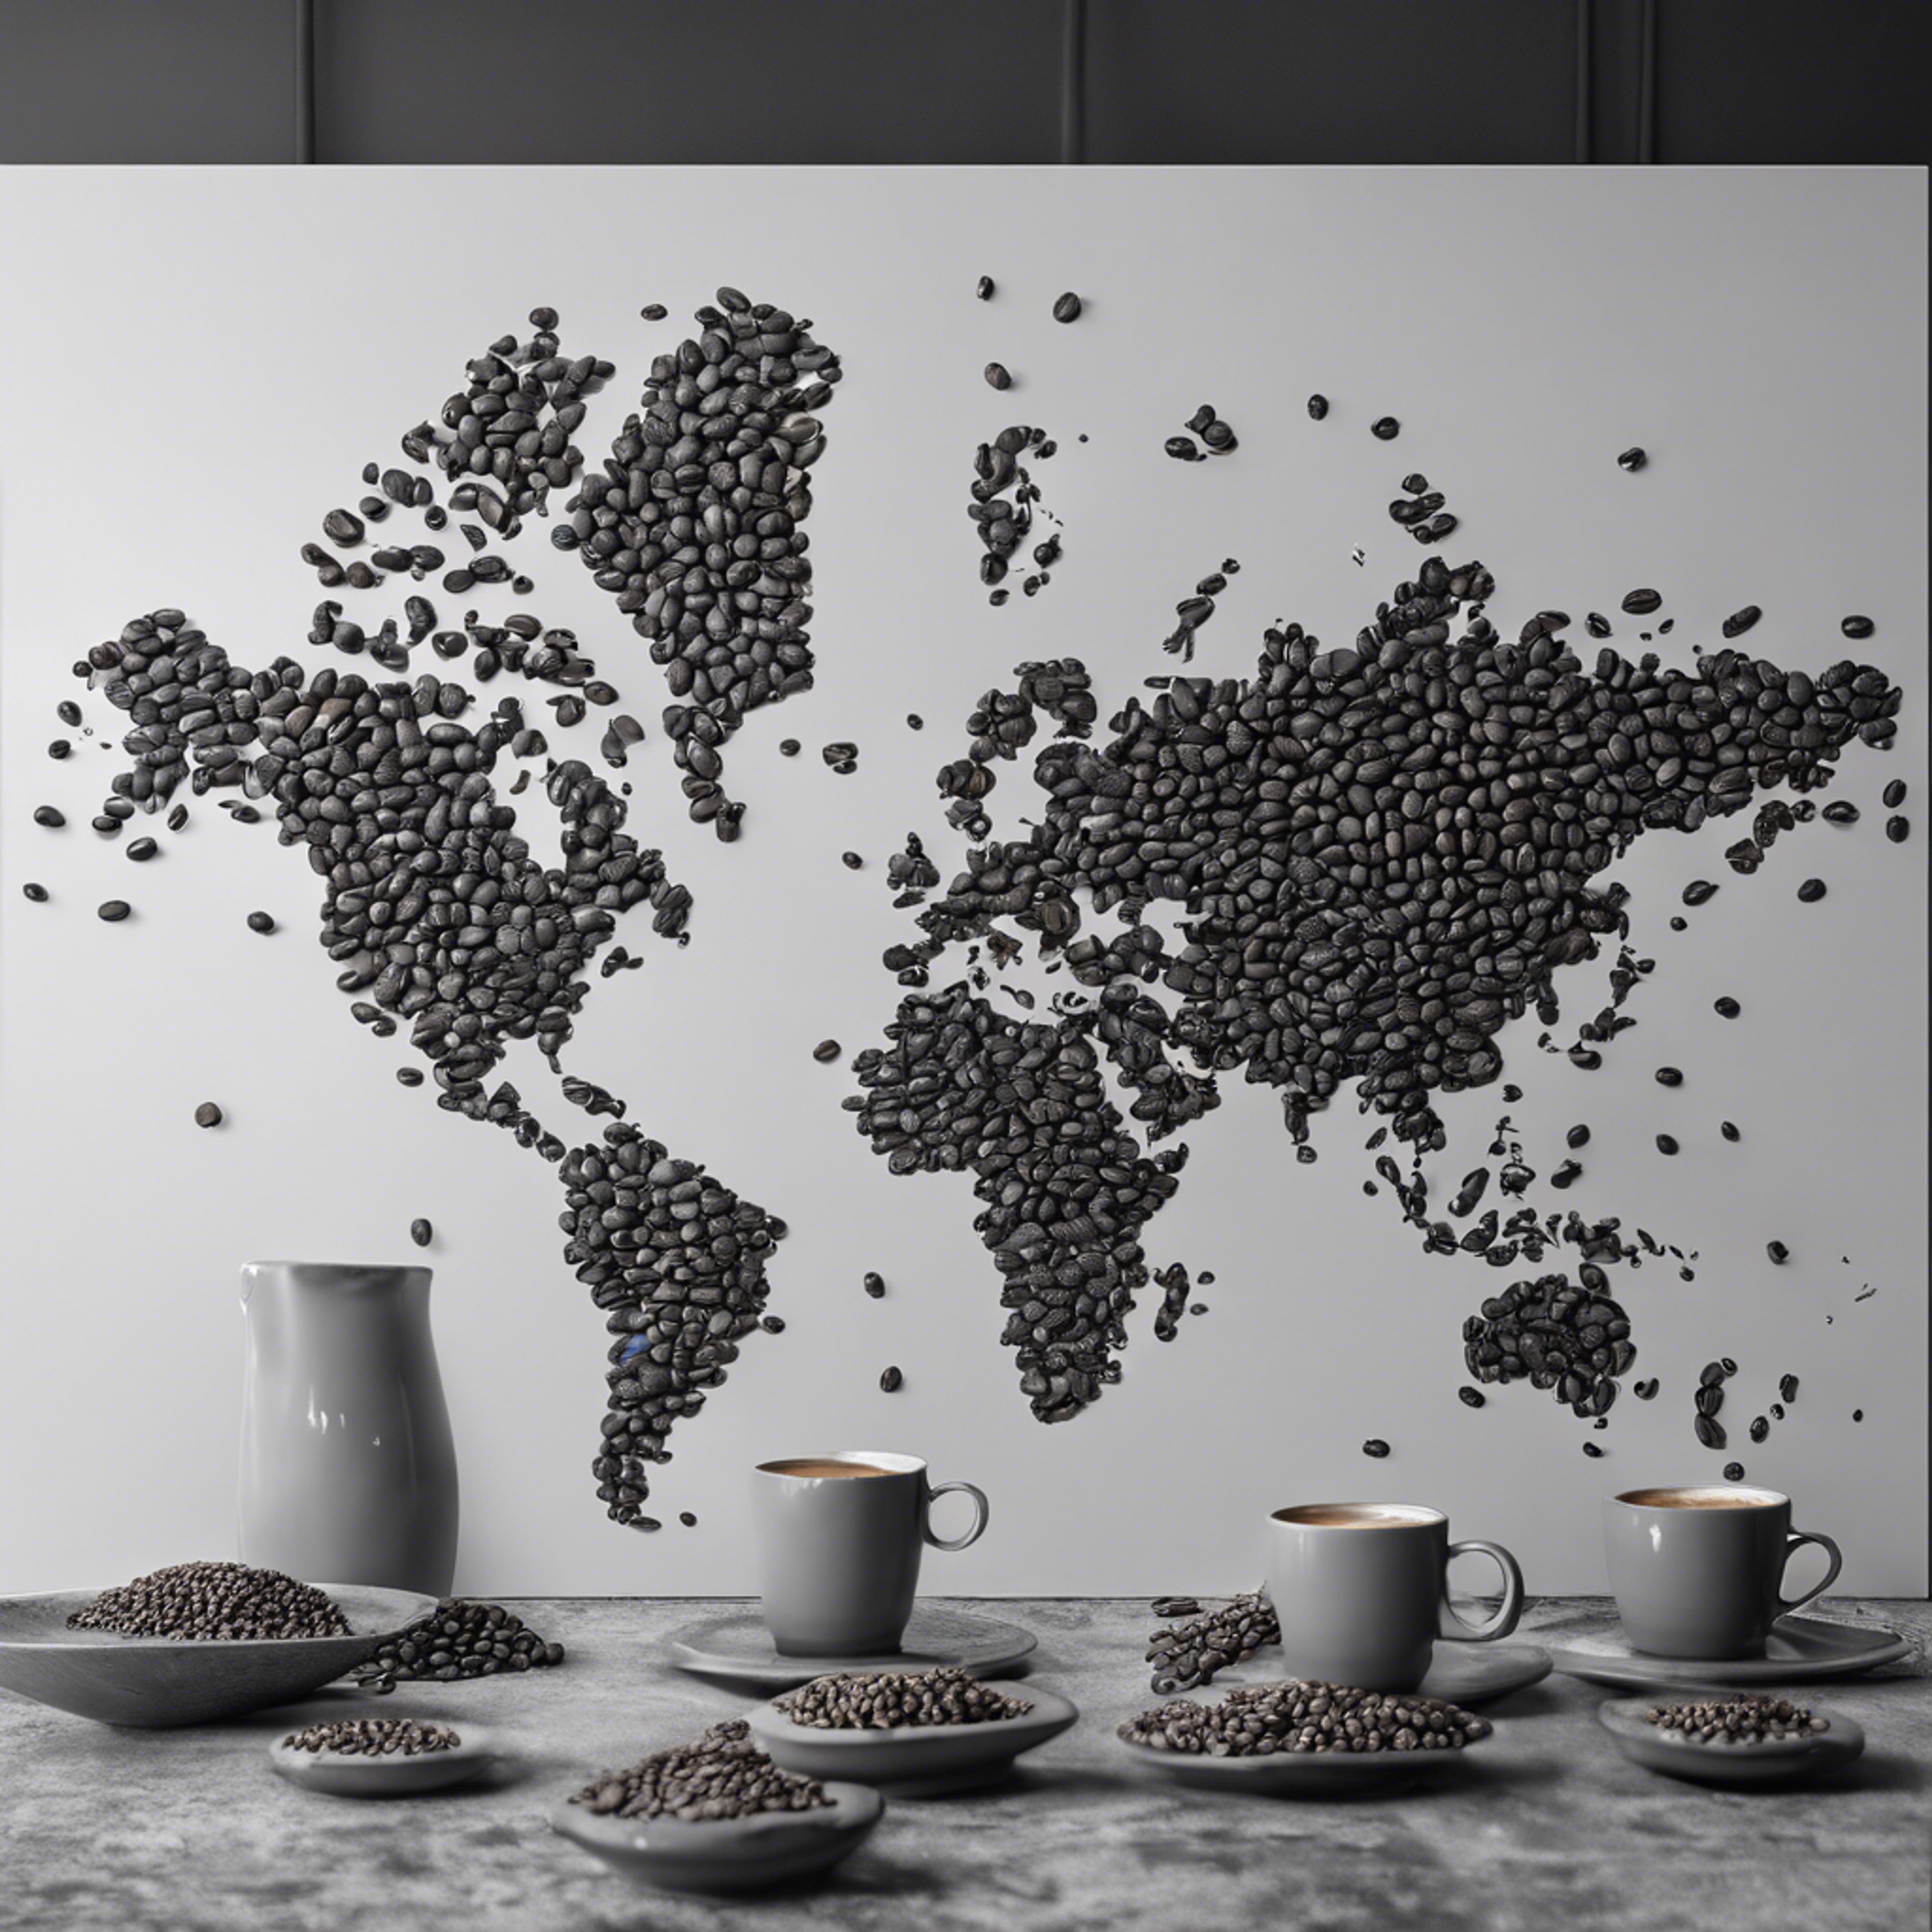 A grayscale world map laid out with coffee beans on a cafe table. Tapetai[a42175c9d73a43528667]